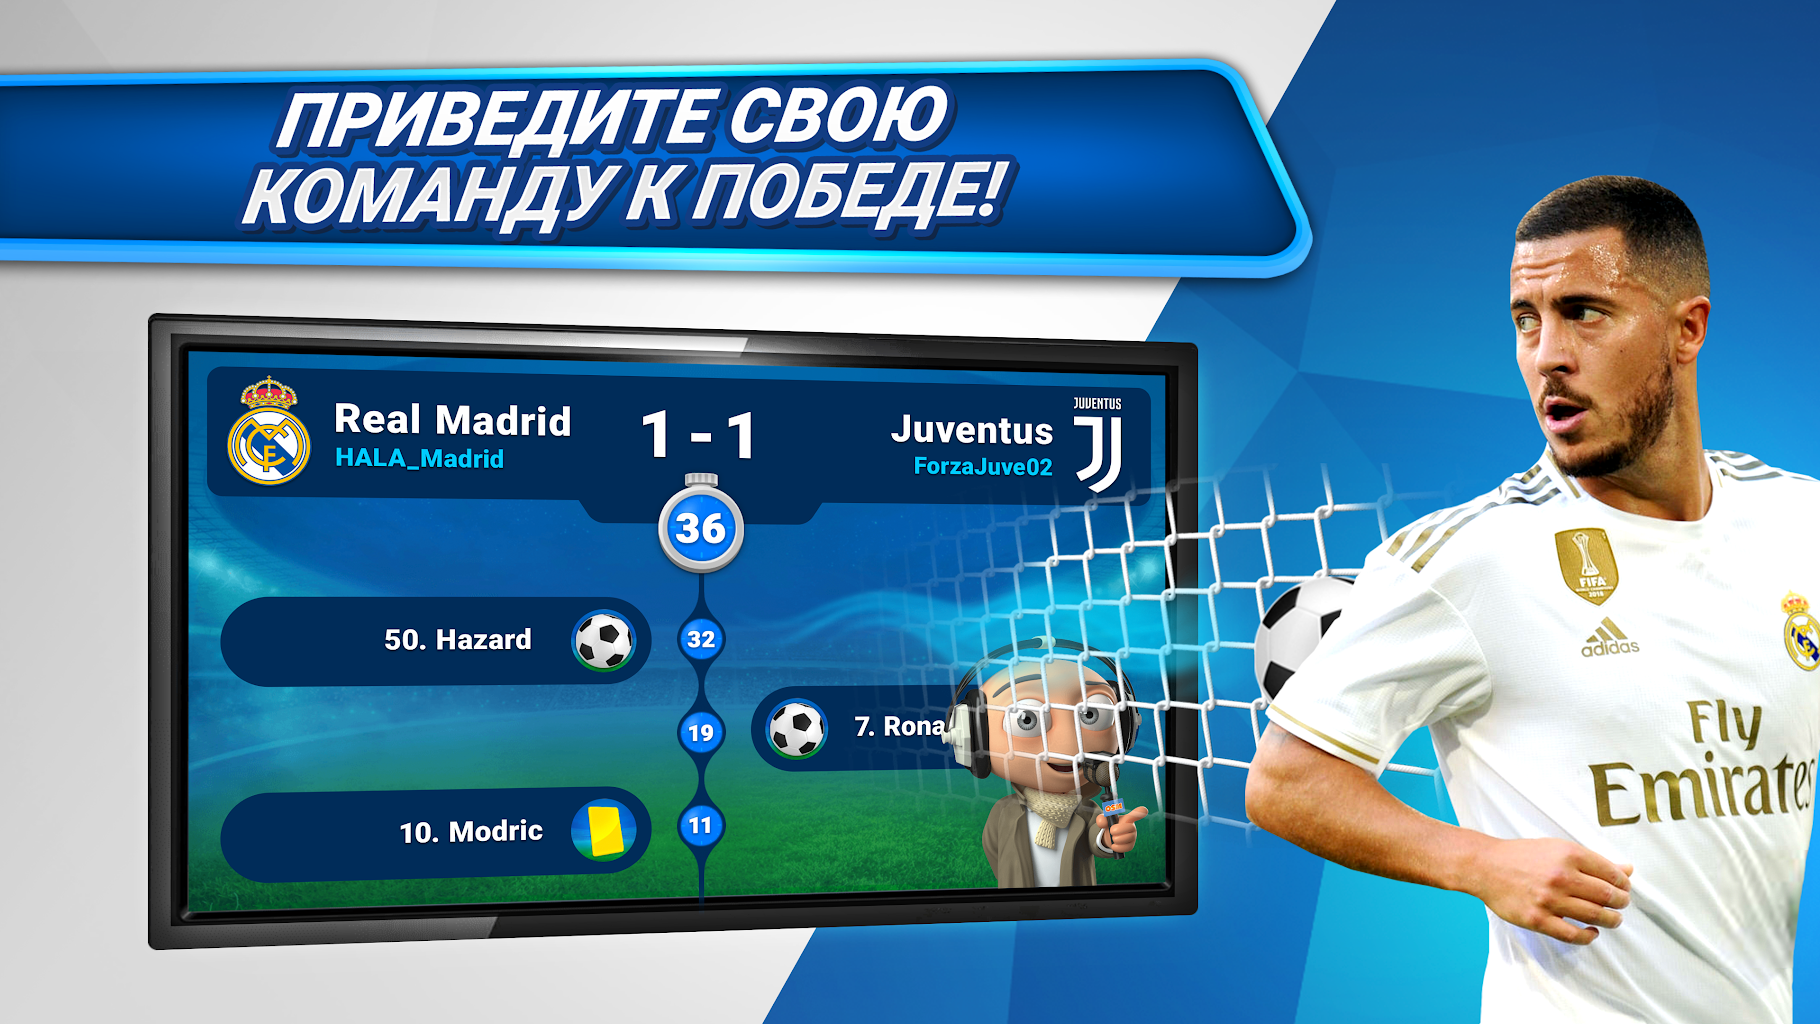 Download Online Soccer Manager (OSM) - 2020 3.4.50.1 APK for android